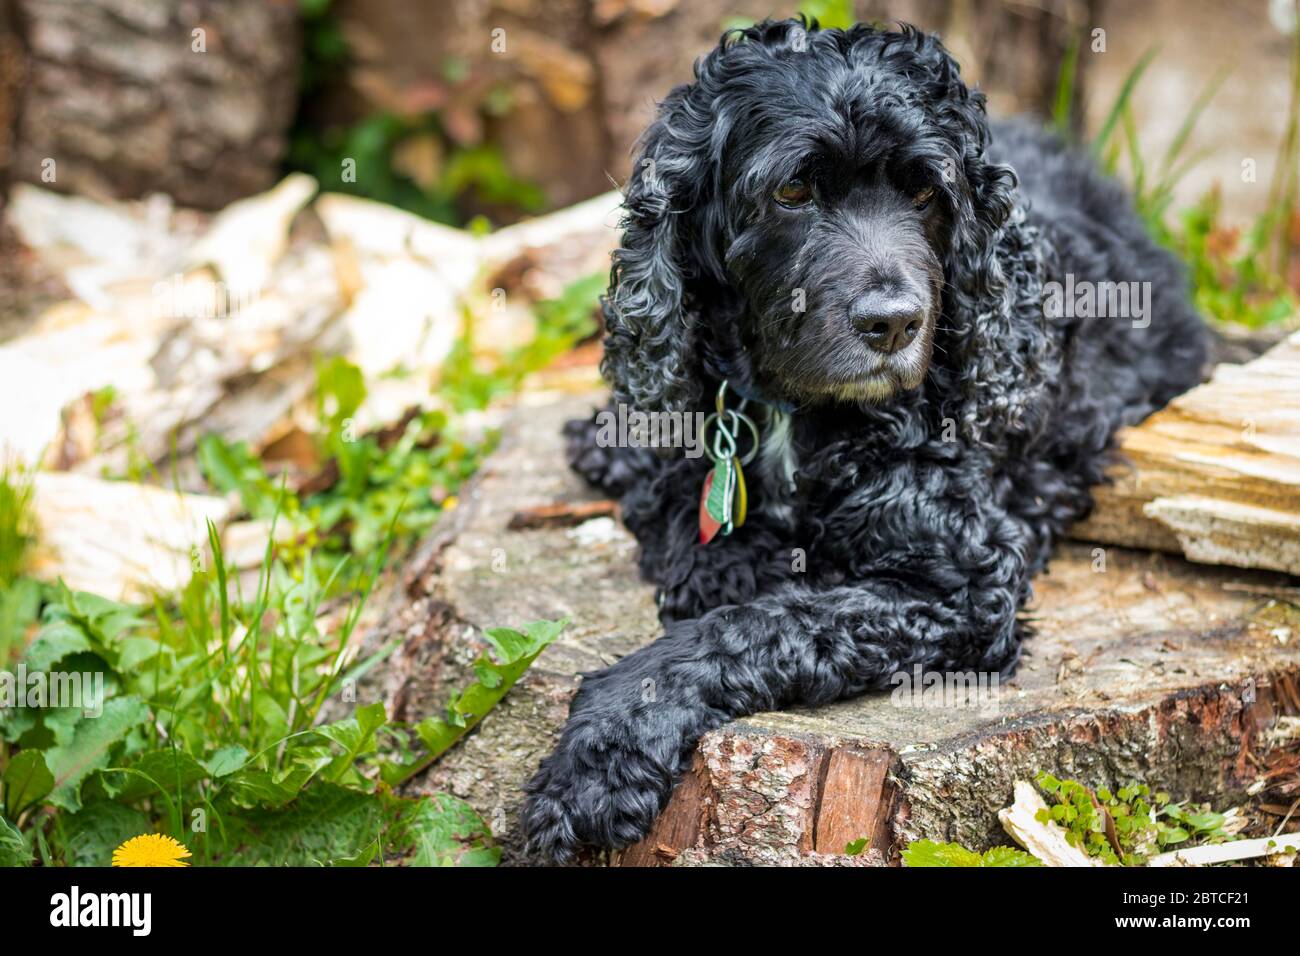 Cocker Spaniel with curly black fur lies down calmly in wooded natural  outdoor setting Stock Photo - Alamy